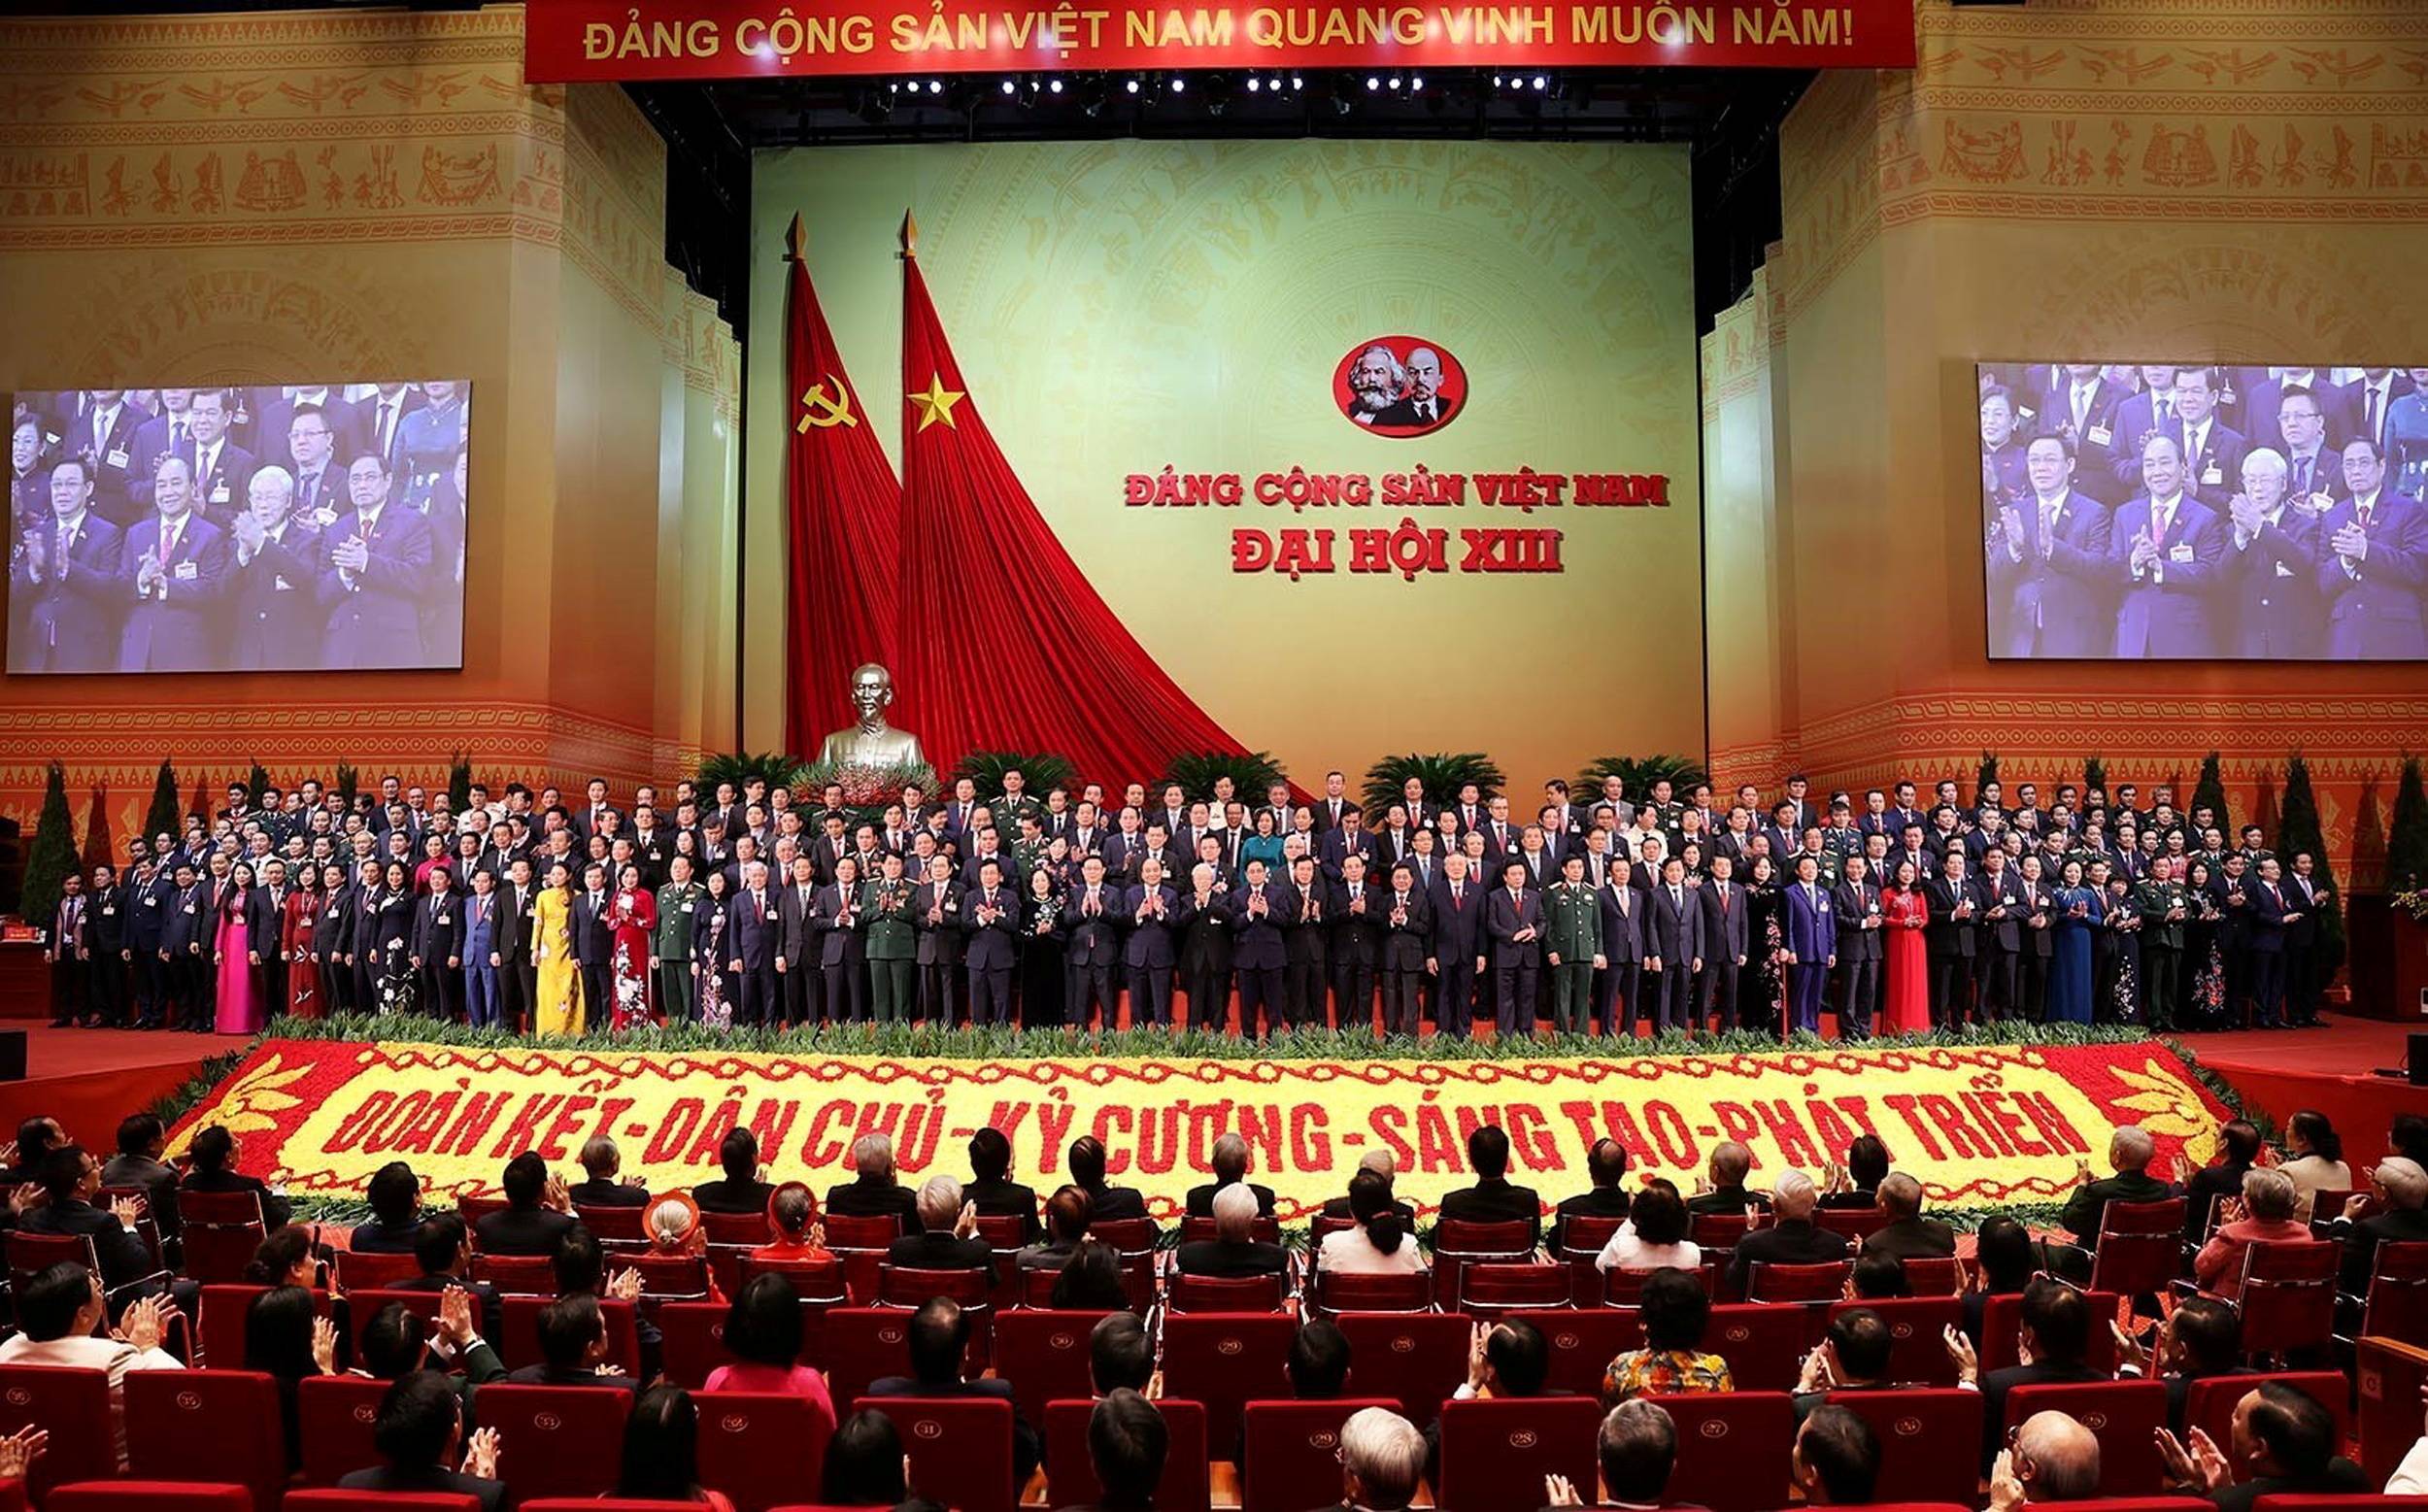 The Vietnamese Communist Party's new 200-member central committee poses at the closing ceremony of the 13th national congress of the ruling party in Hanoi on Monday. | VNA / VIA REUTERS